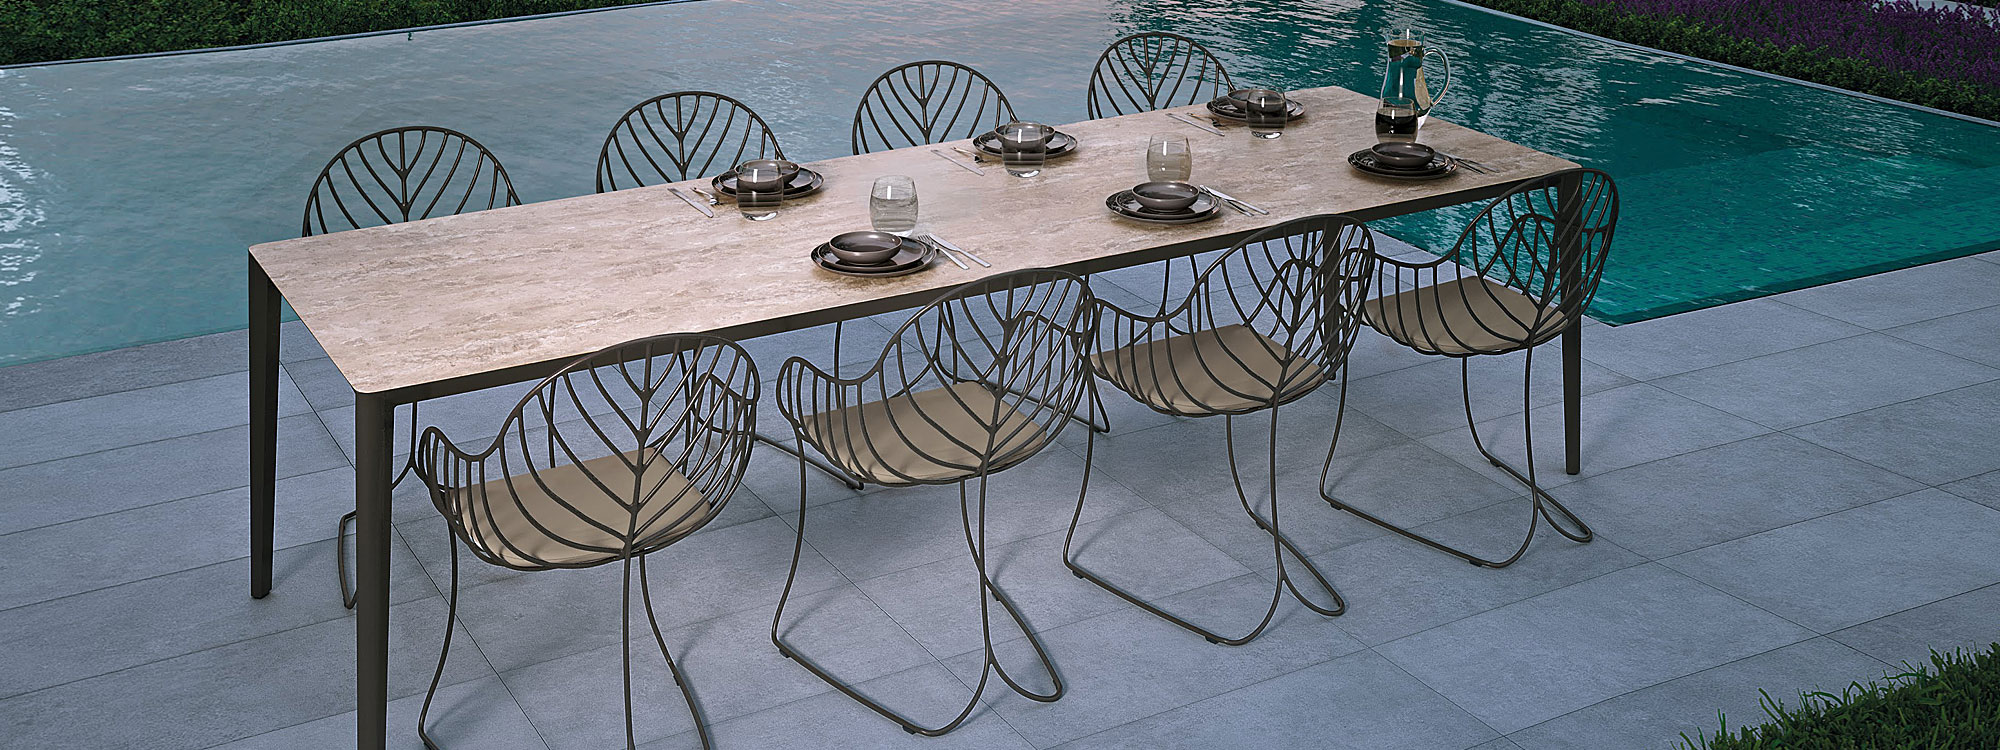 Image of bronze Folia chairs and bronze UNITE table with travertine ceramic top by Royal Botania